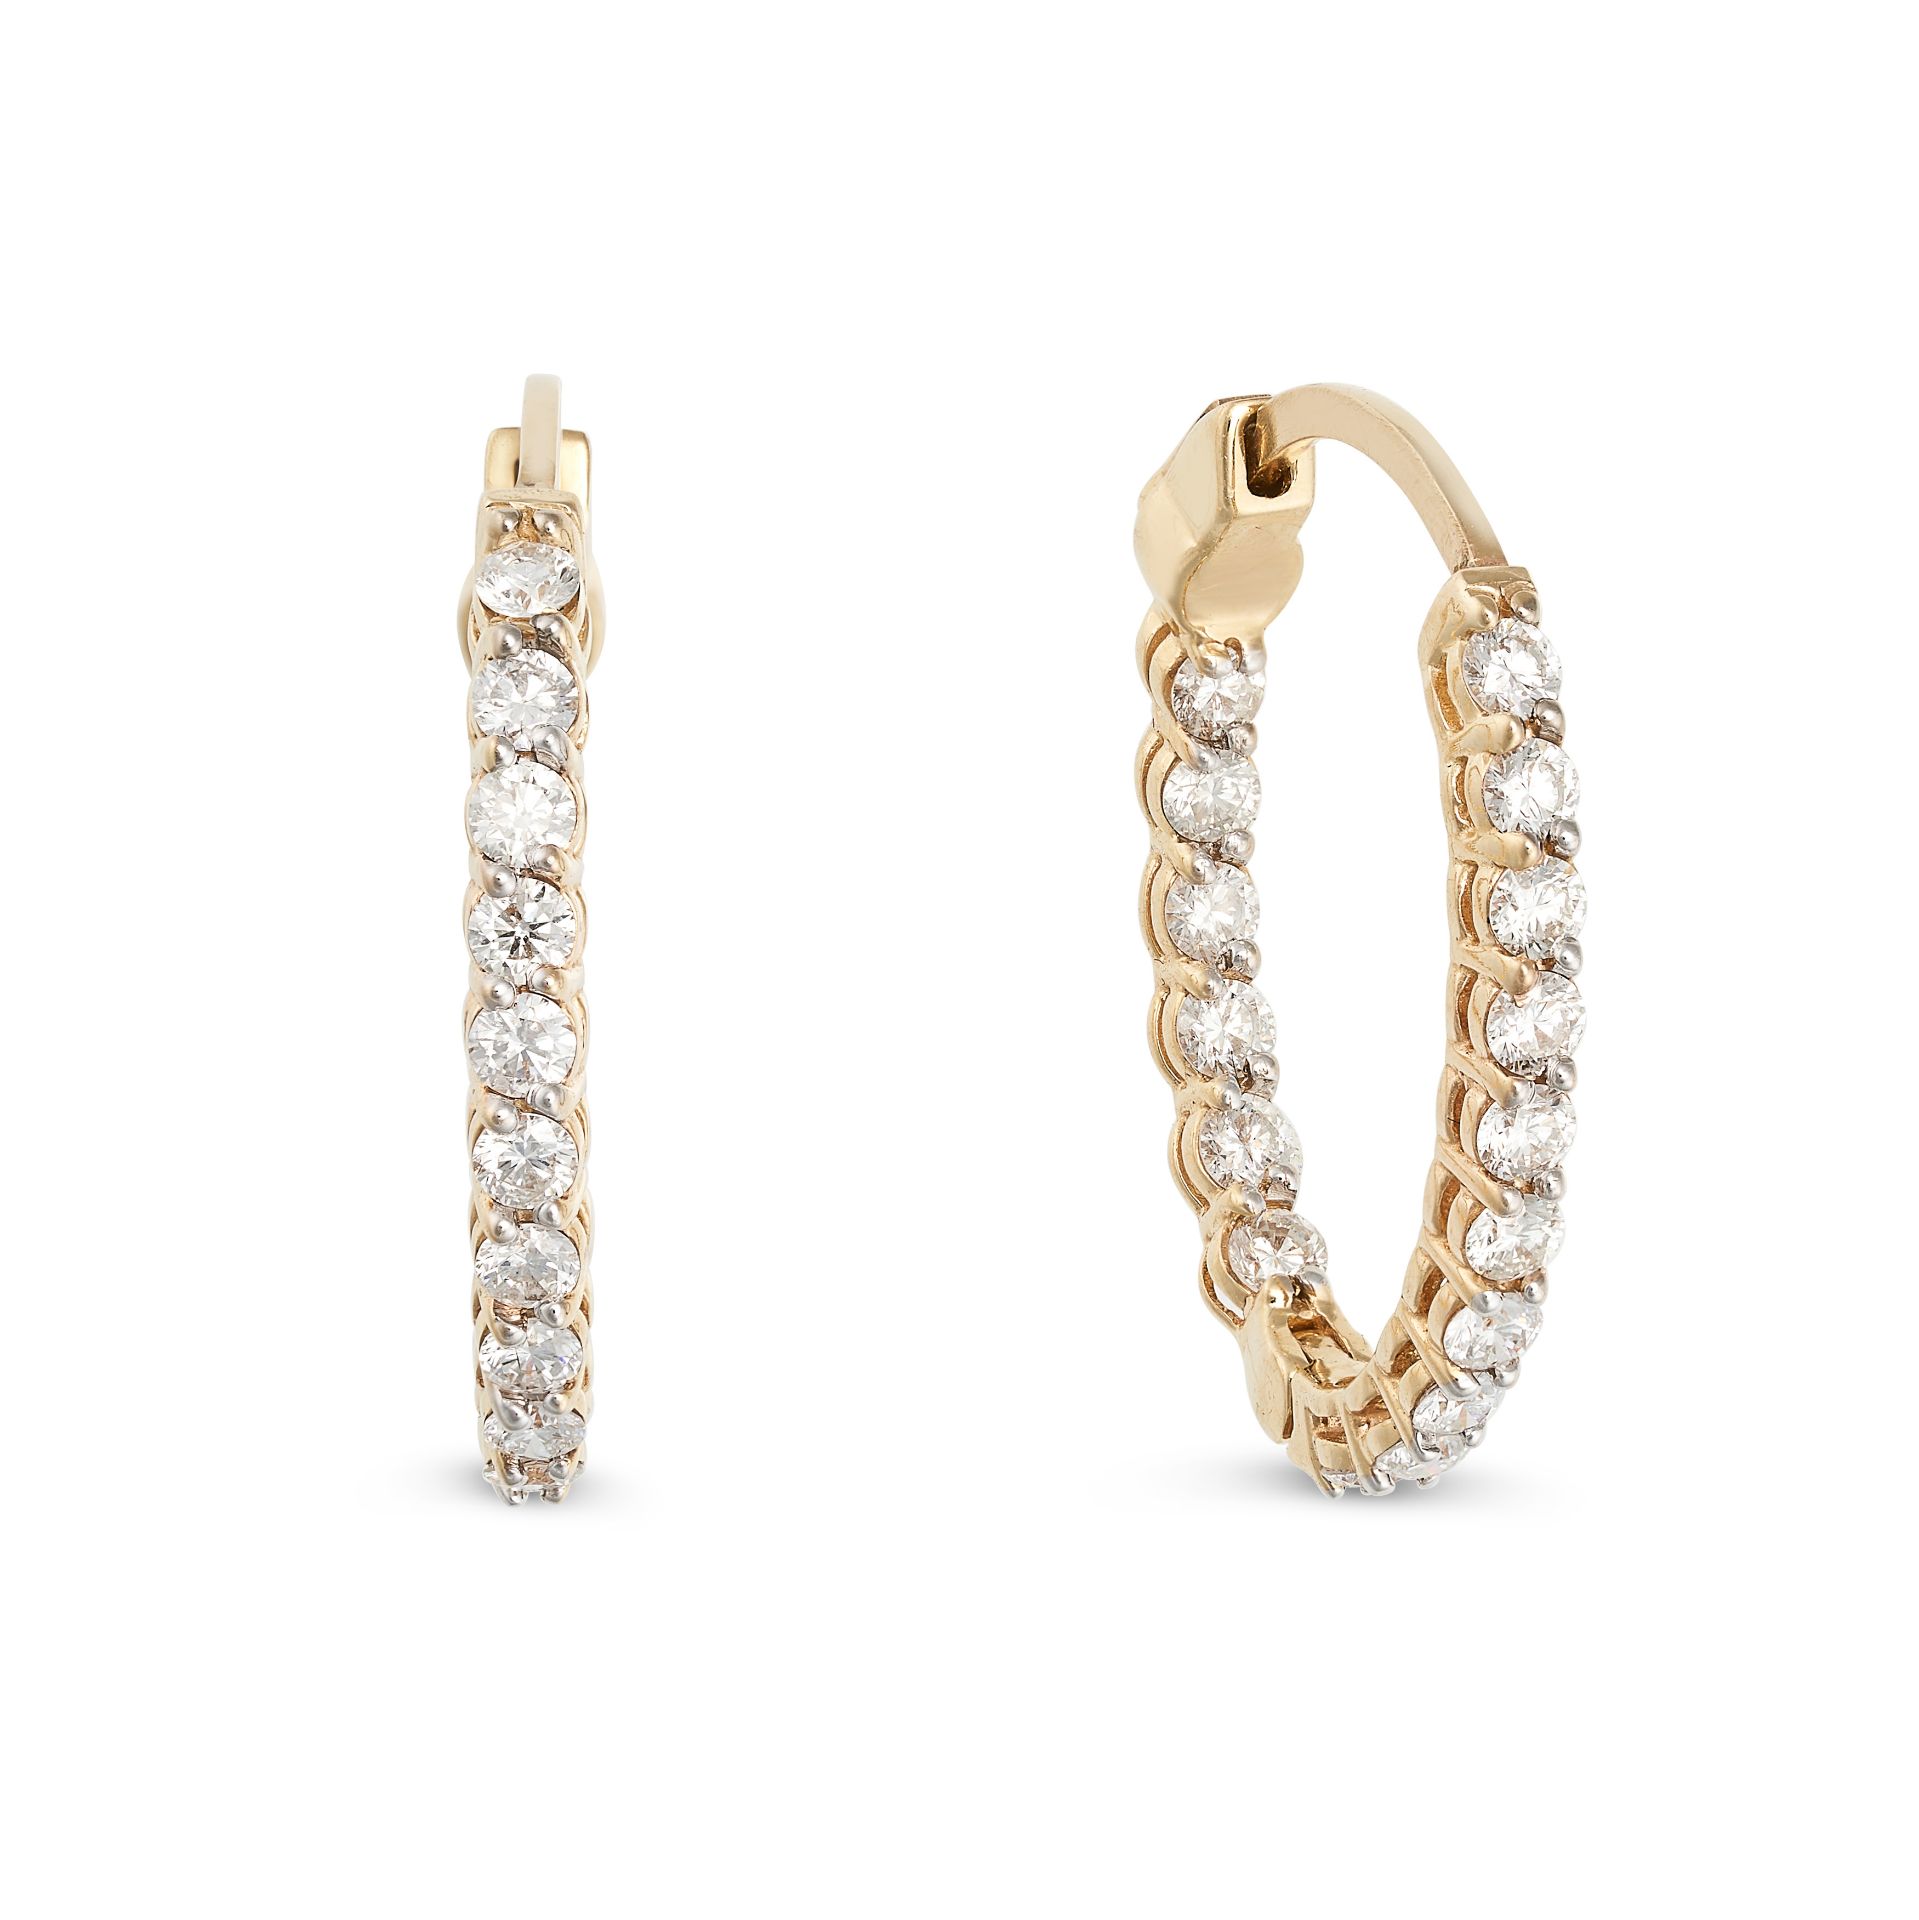 A PAIR OF DIAMOND HOOP EARRINGS in yellow gold, each designed as a hoop set inside out with a row...